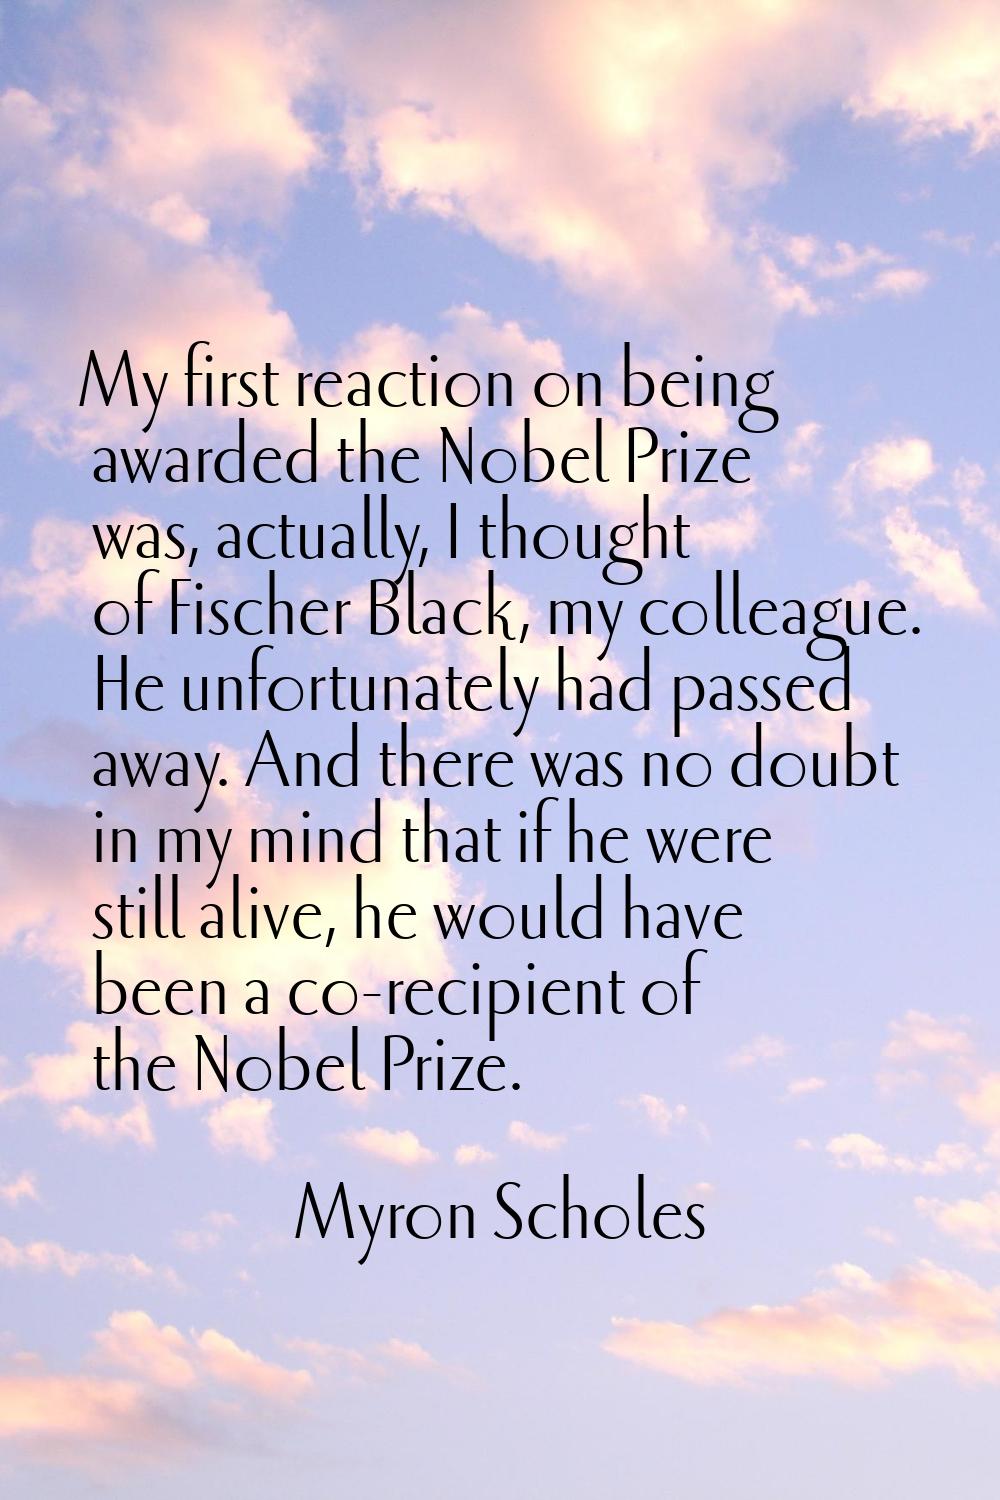 My first reaction on being awarded the Nobel Prize was, actually, I thought of Fischer Black, my co